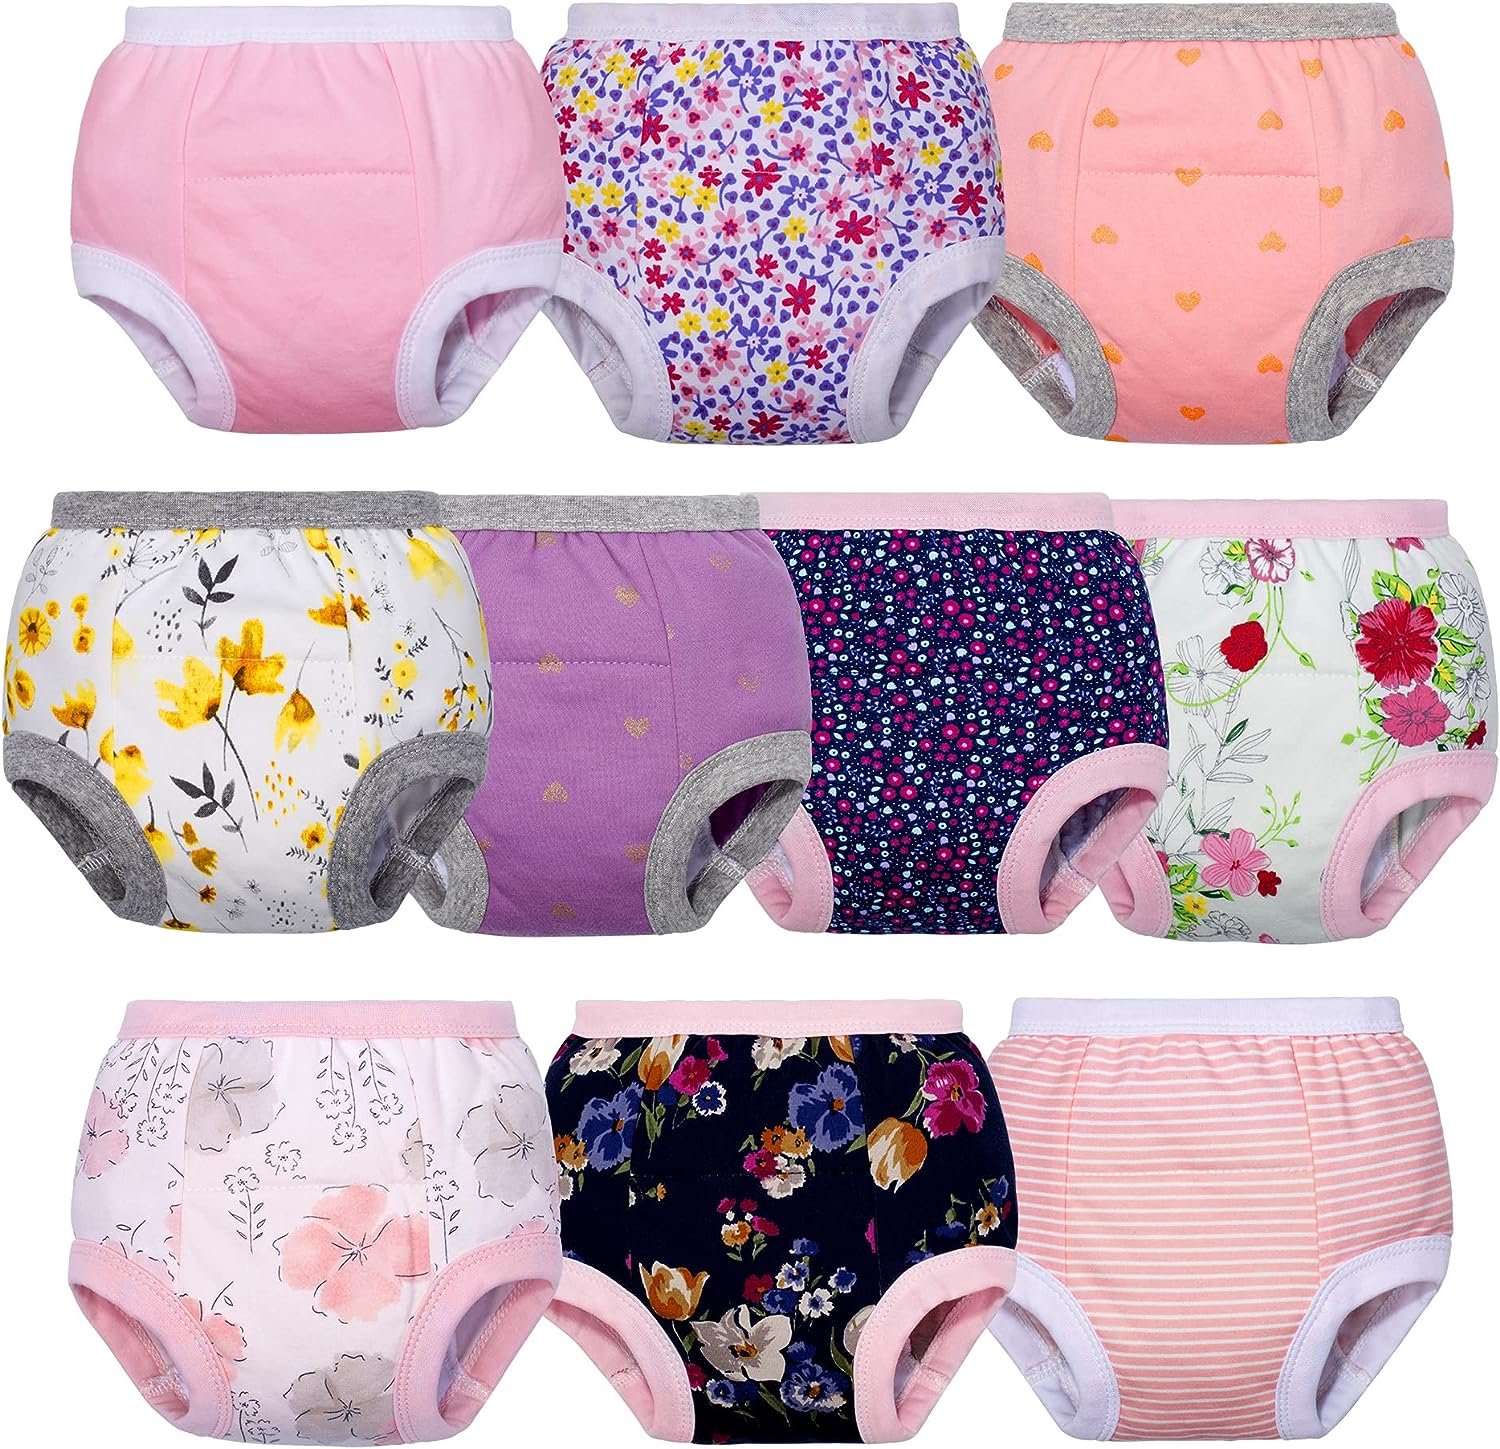 BIG ELEPHANT Baby Girls Training Underwear for Toddler Cotton Training Pants Soft and Absorbent 12 Months-5T